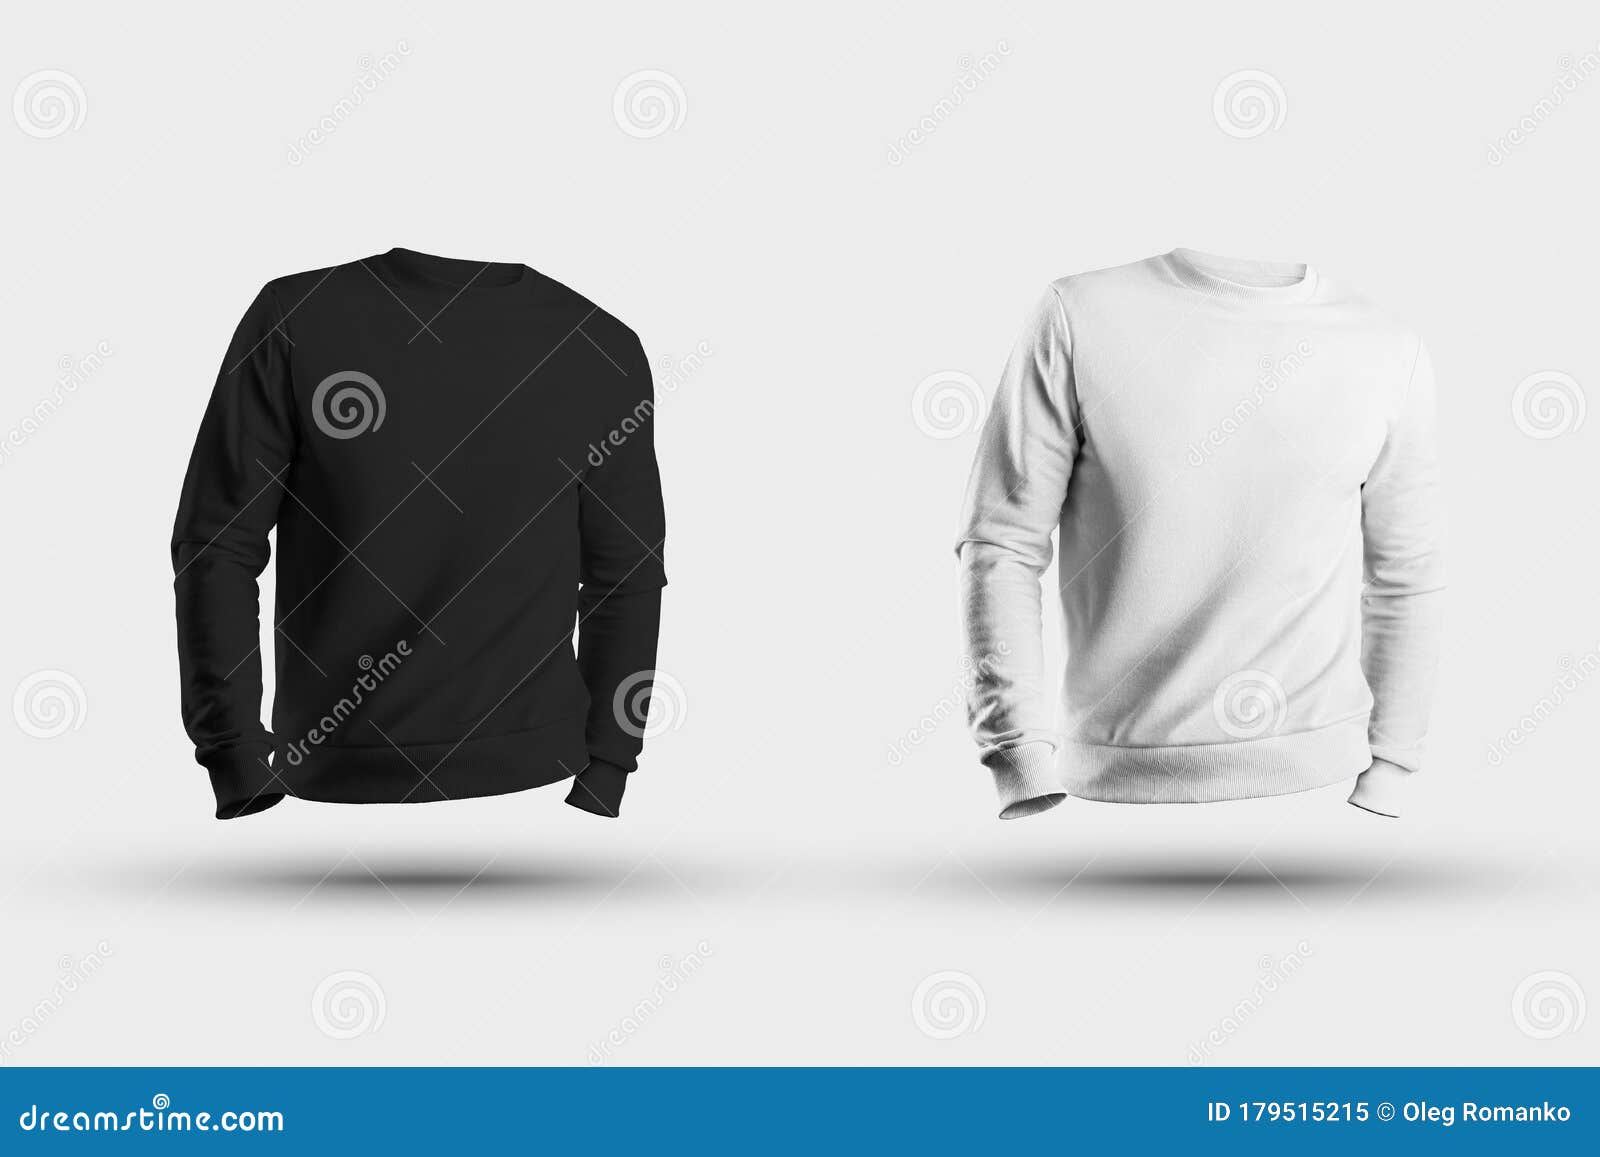 Download Mockup Of Male Blank Pullover, With Realistic Shadows, 3D ...